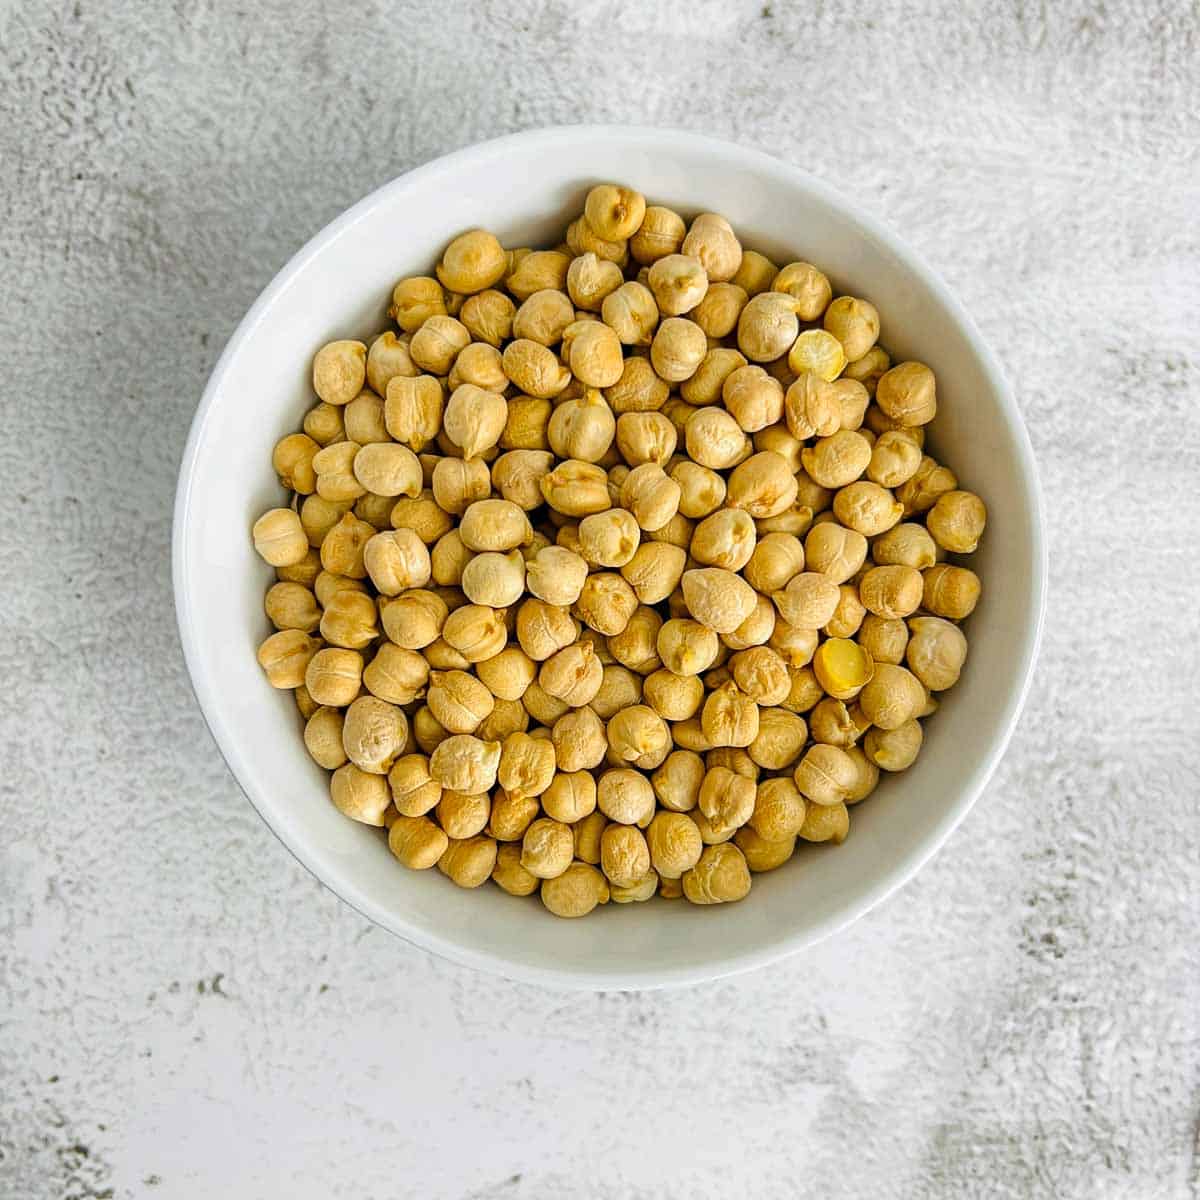 Dried chickpeas in a white bowl.